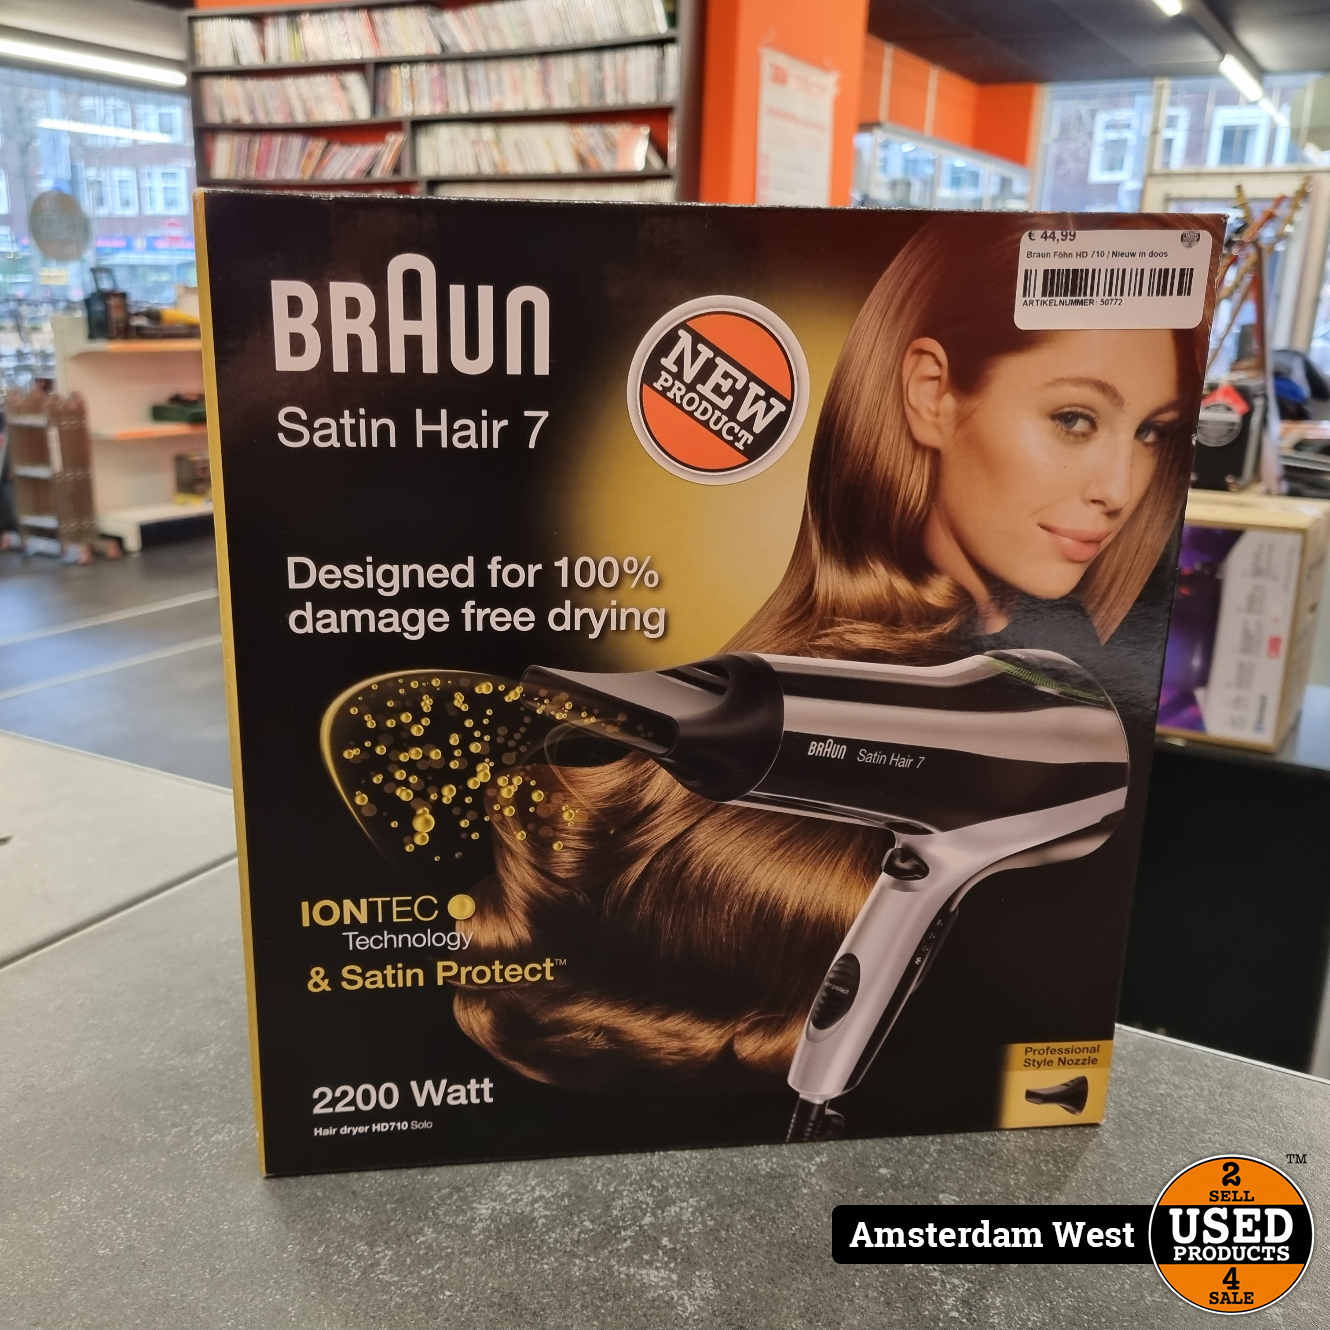 hobby Beschrijving map Braun Föhn HD 710 | Nieuw in doos - Used Products Amsterdam West